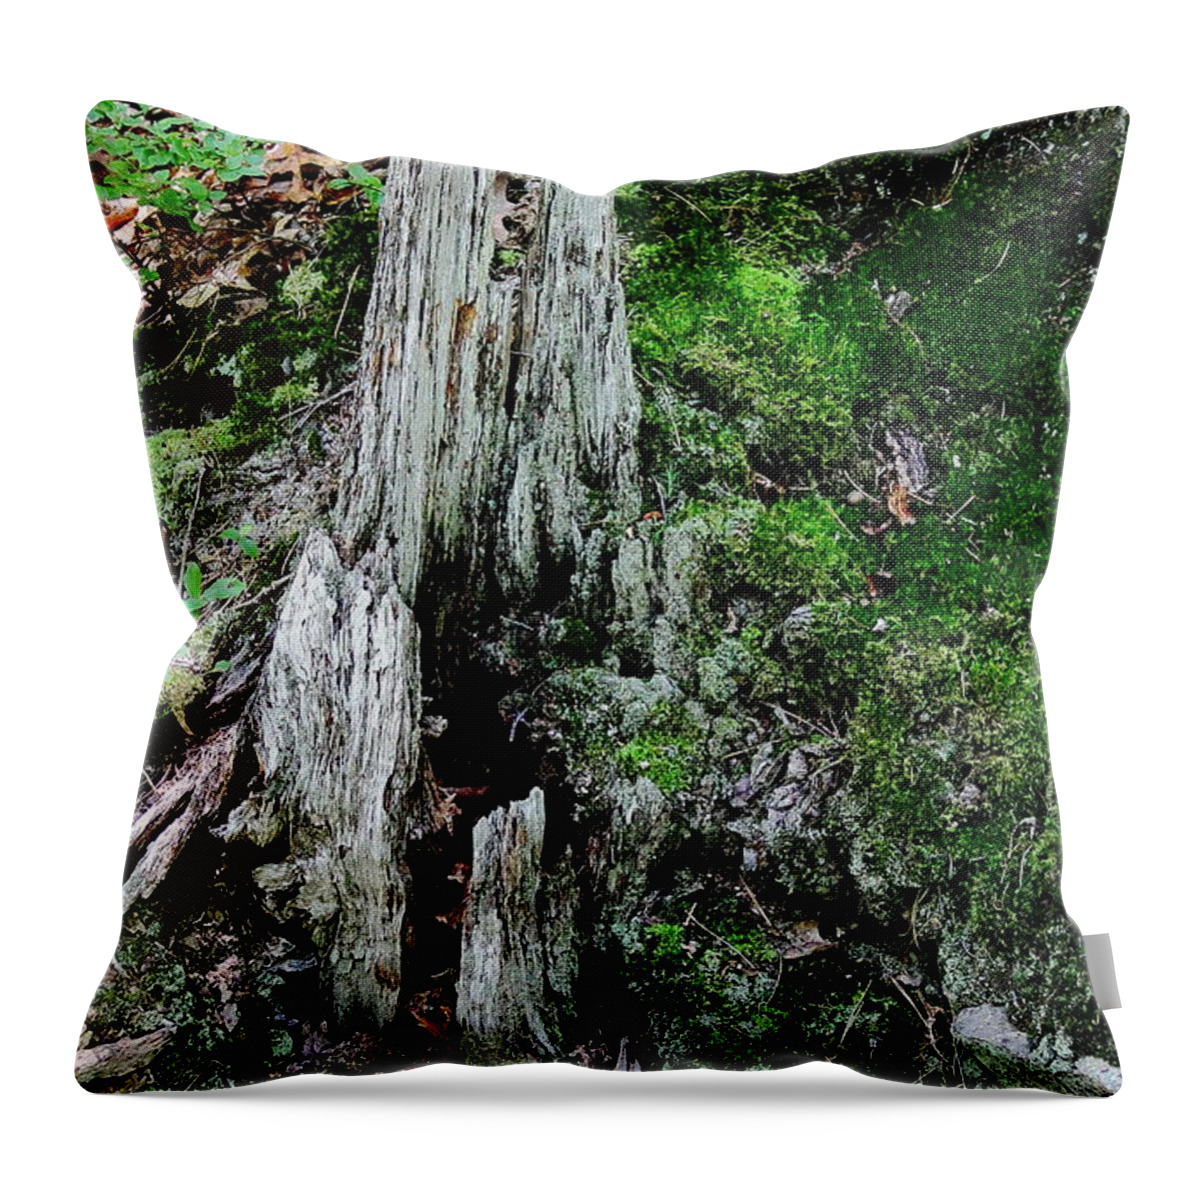 Stump Throw Pillow featuring the photograph Growth and Decay by Allen Nice-Webb